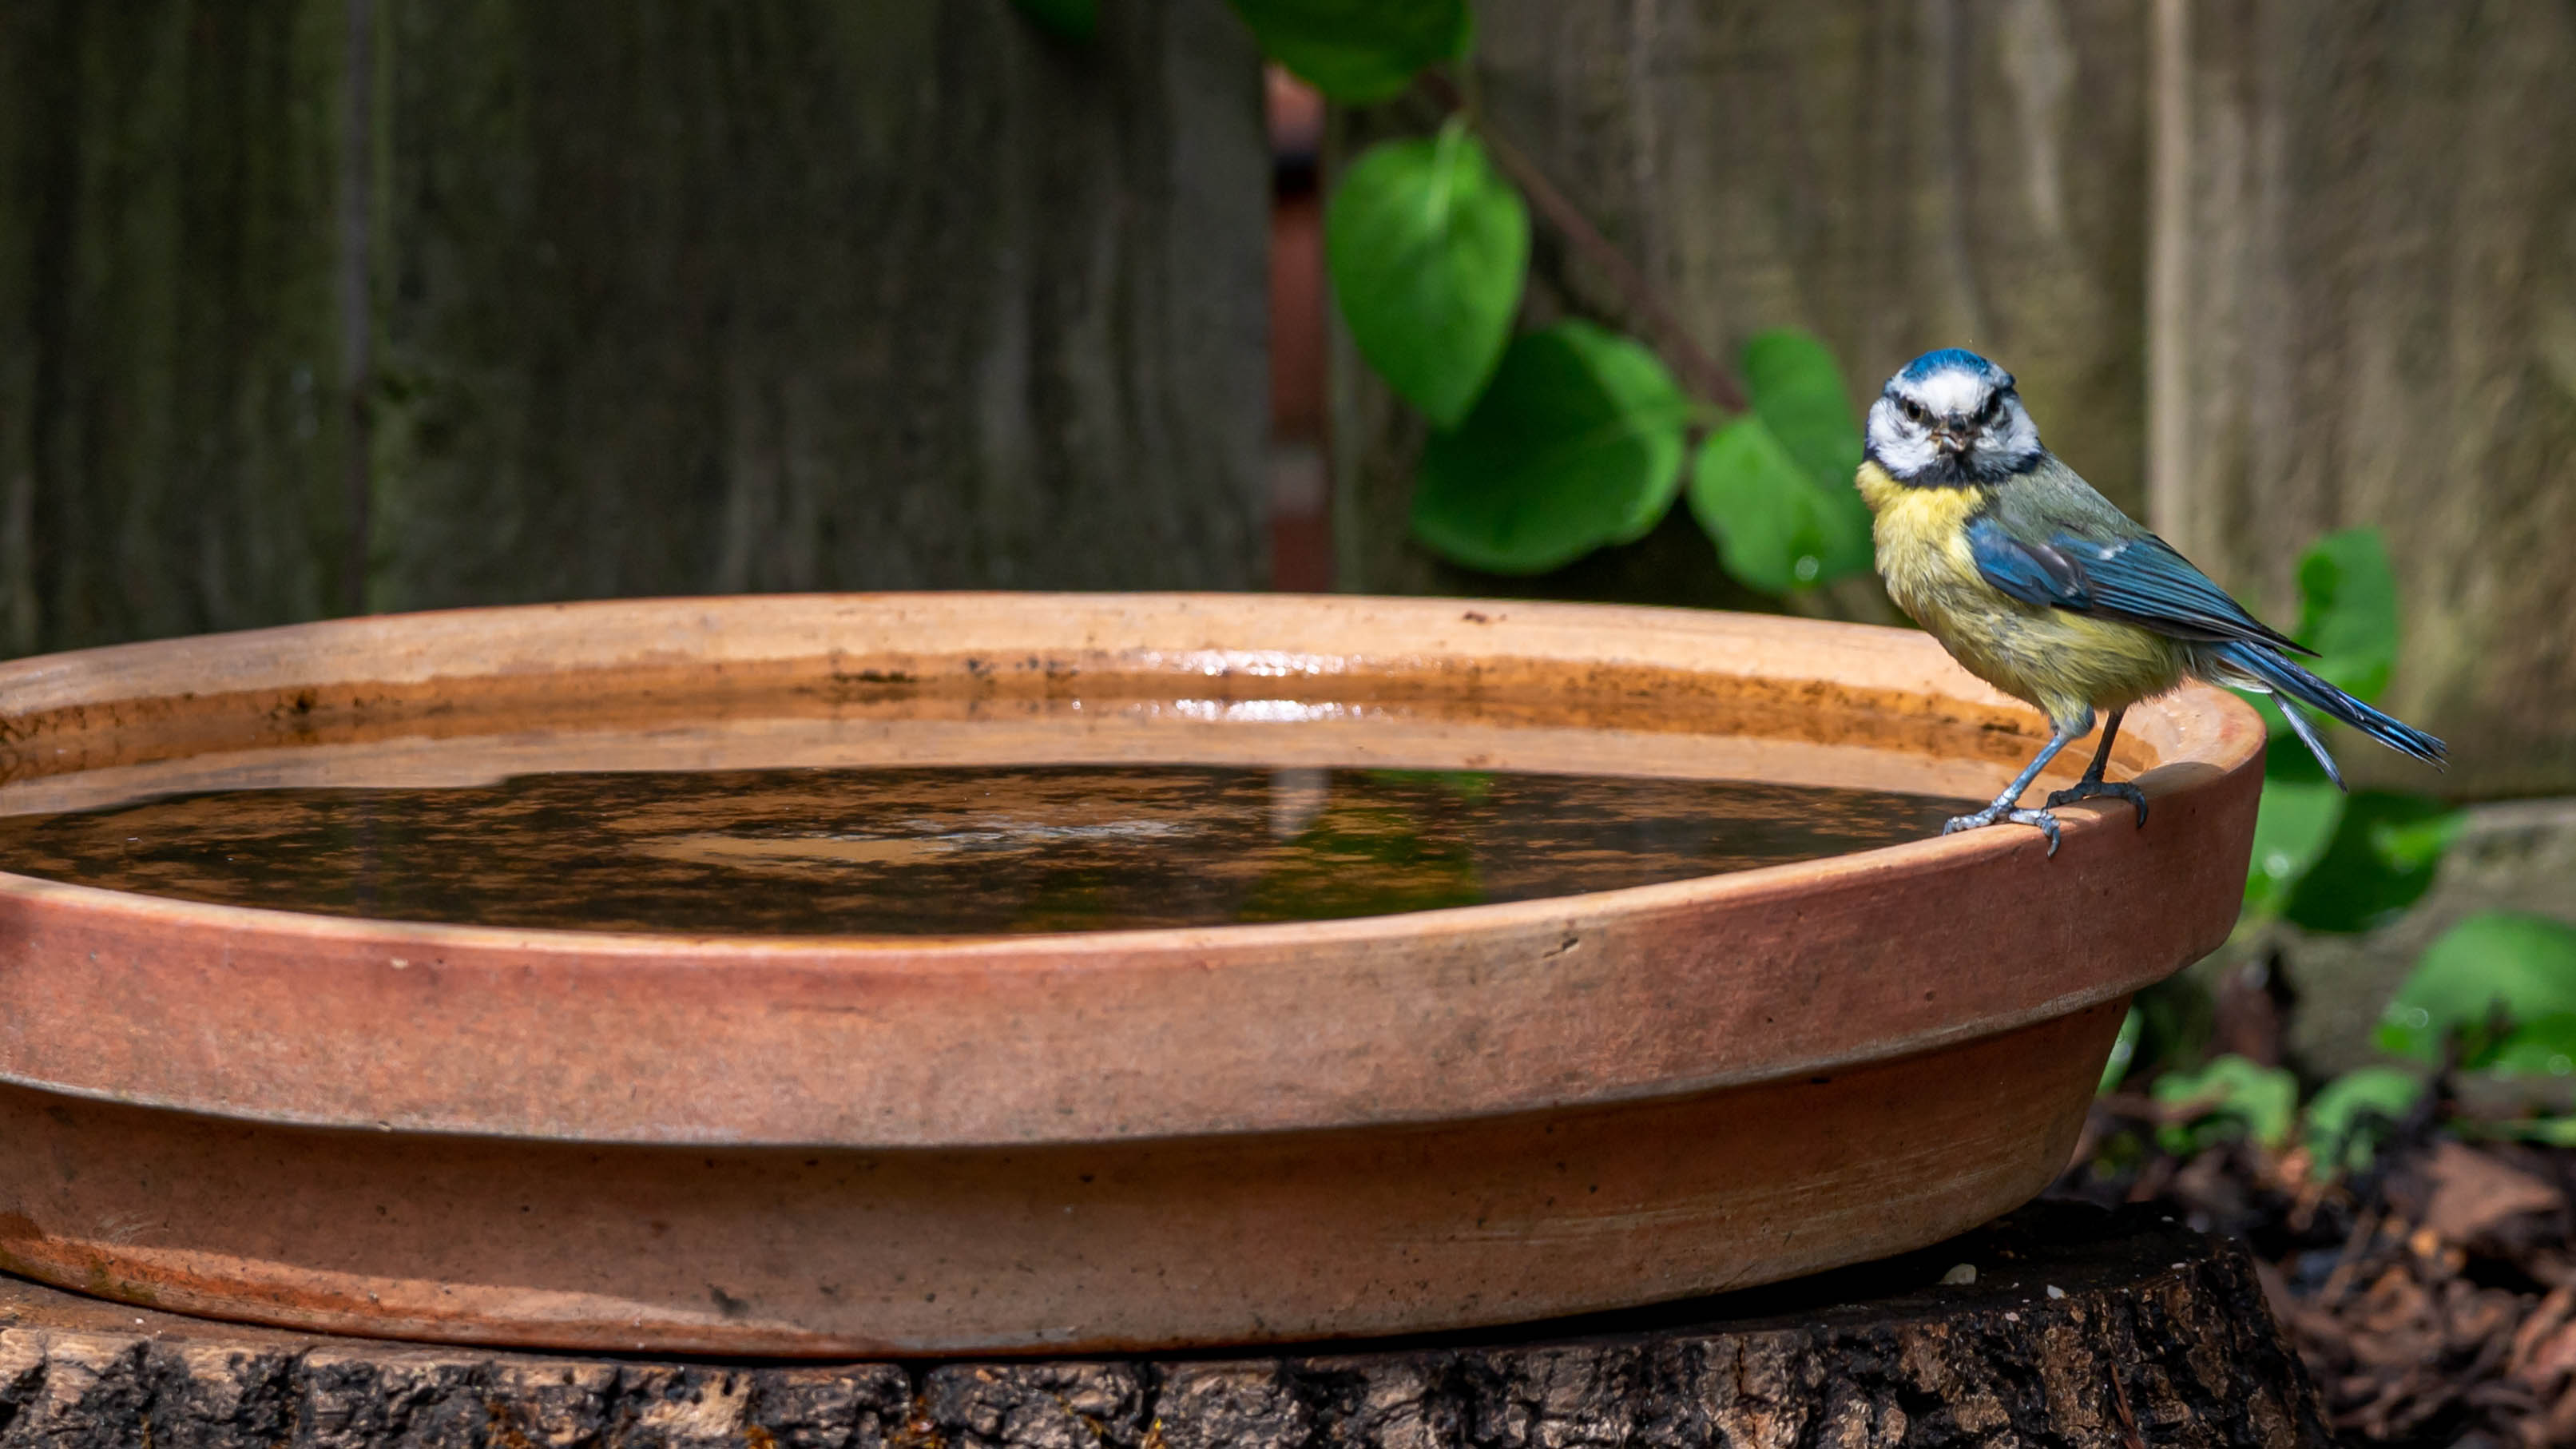 A bird bath with standing water with a Blue Tit perched on the edge